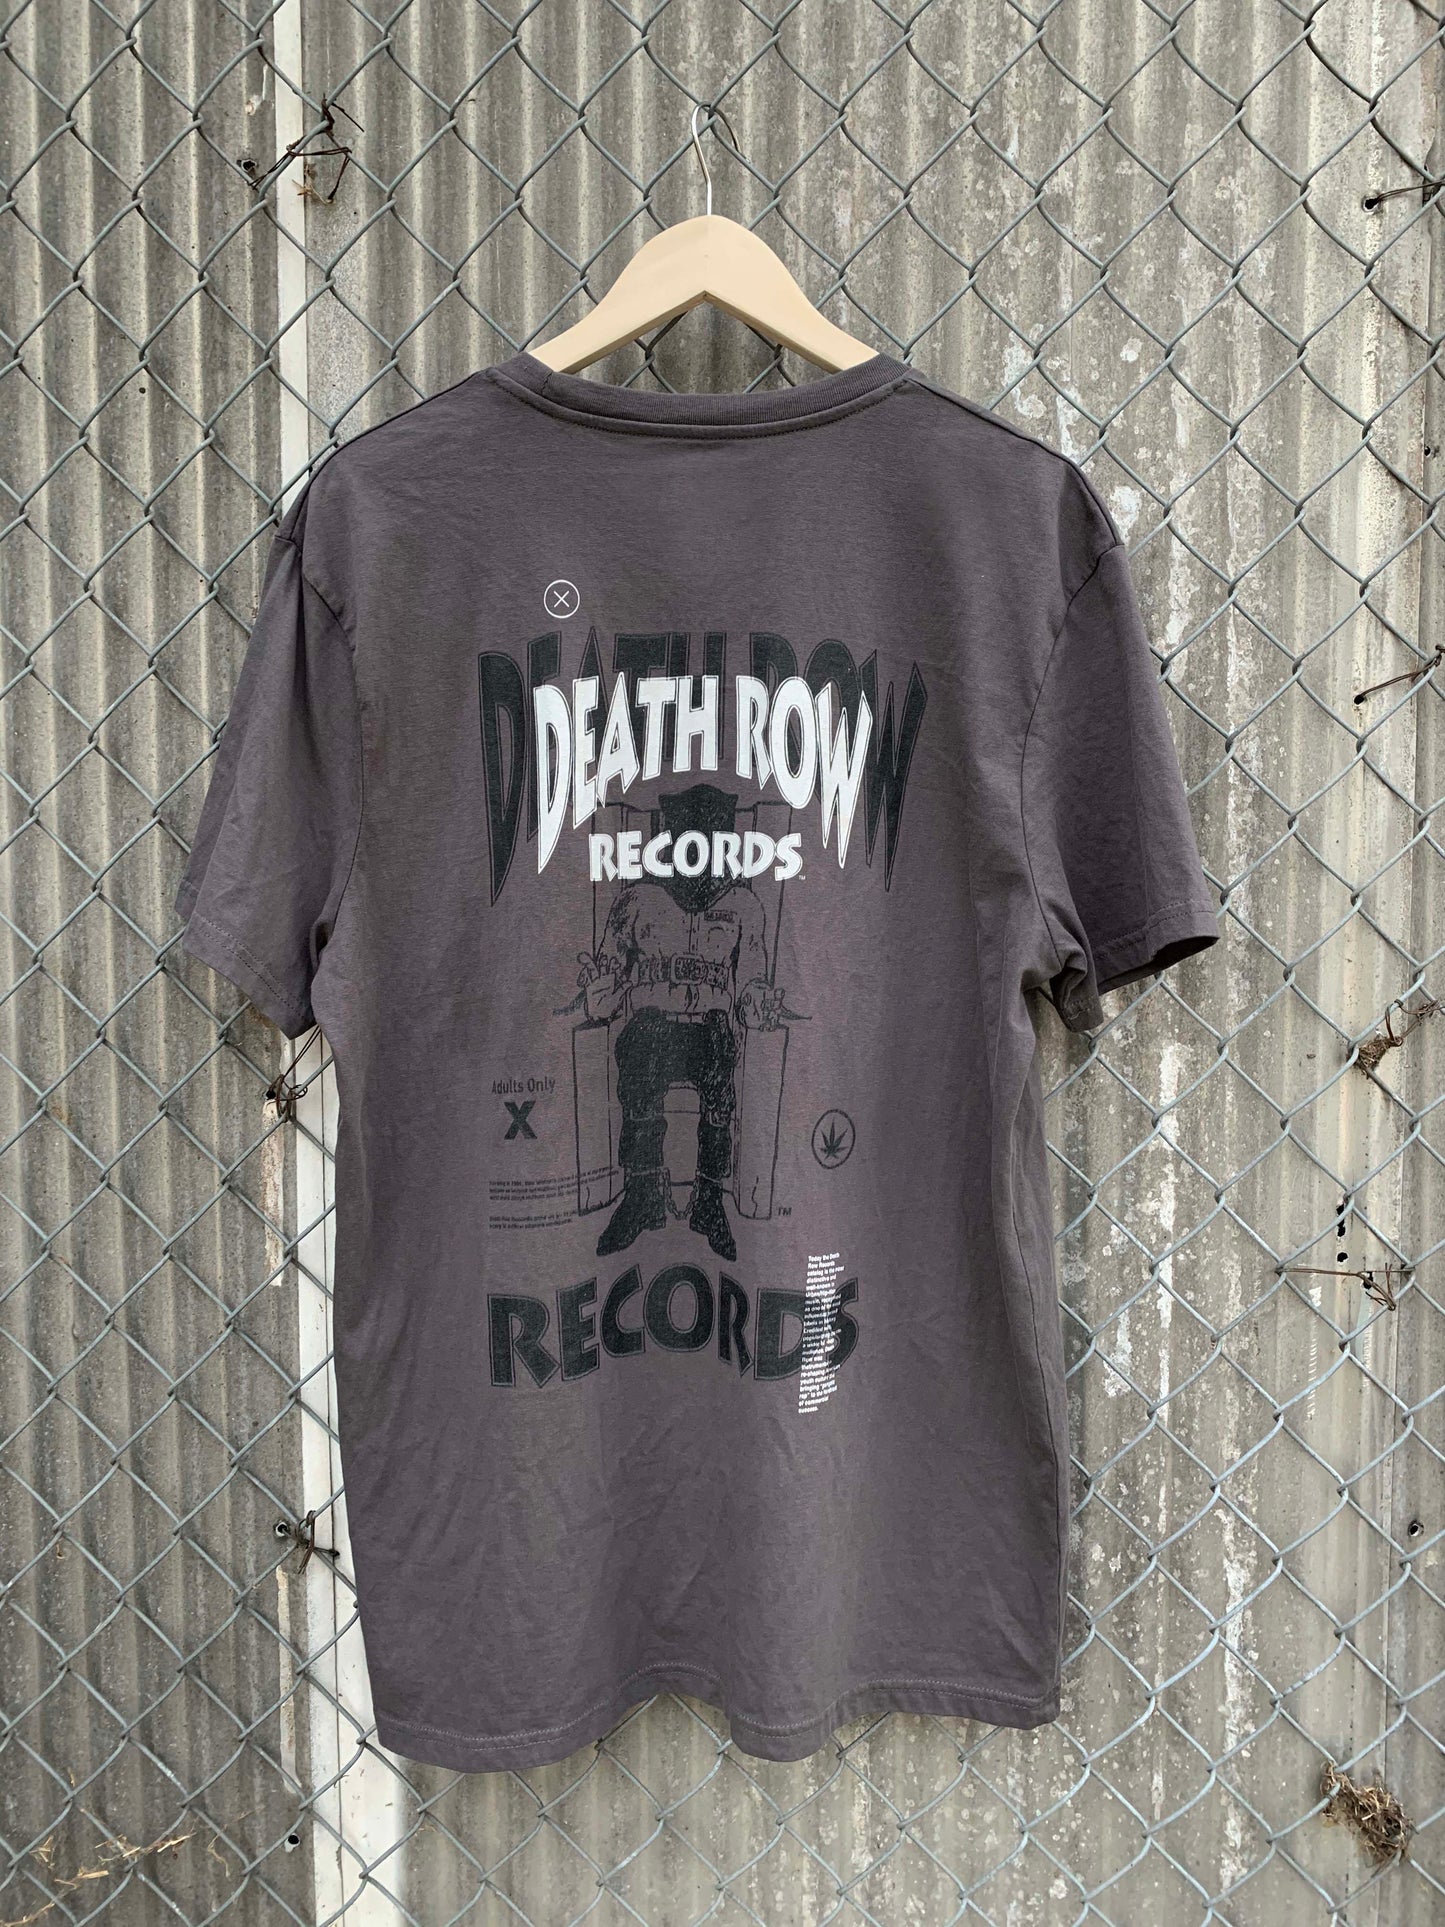 APOH X Death Row Records / Long Beach Sustainable T-Shirt